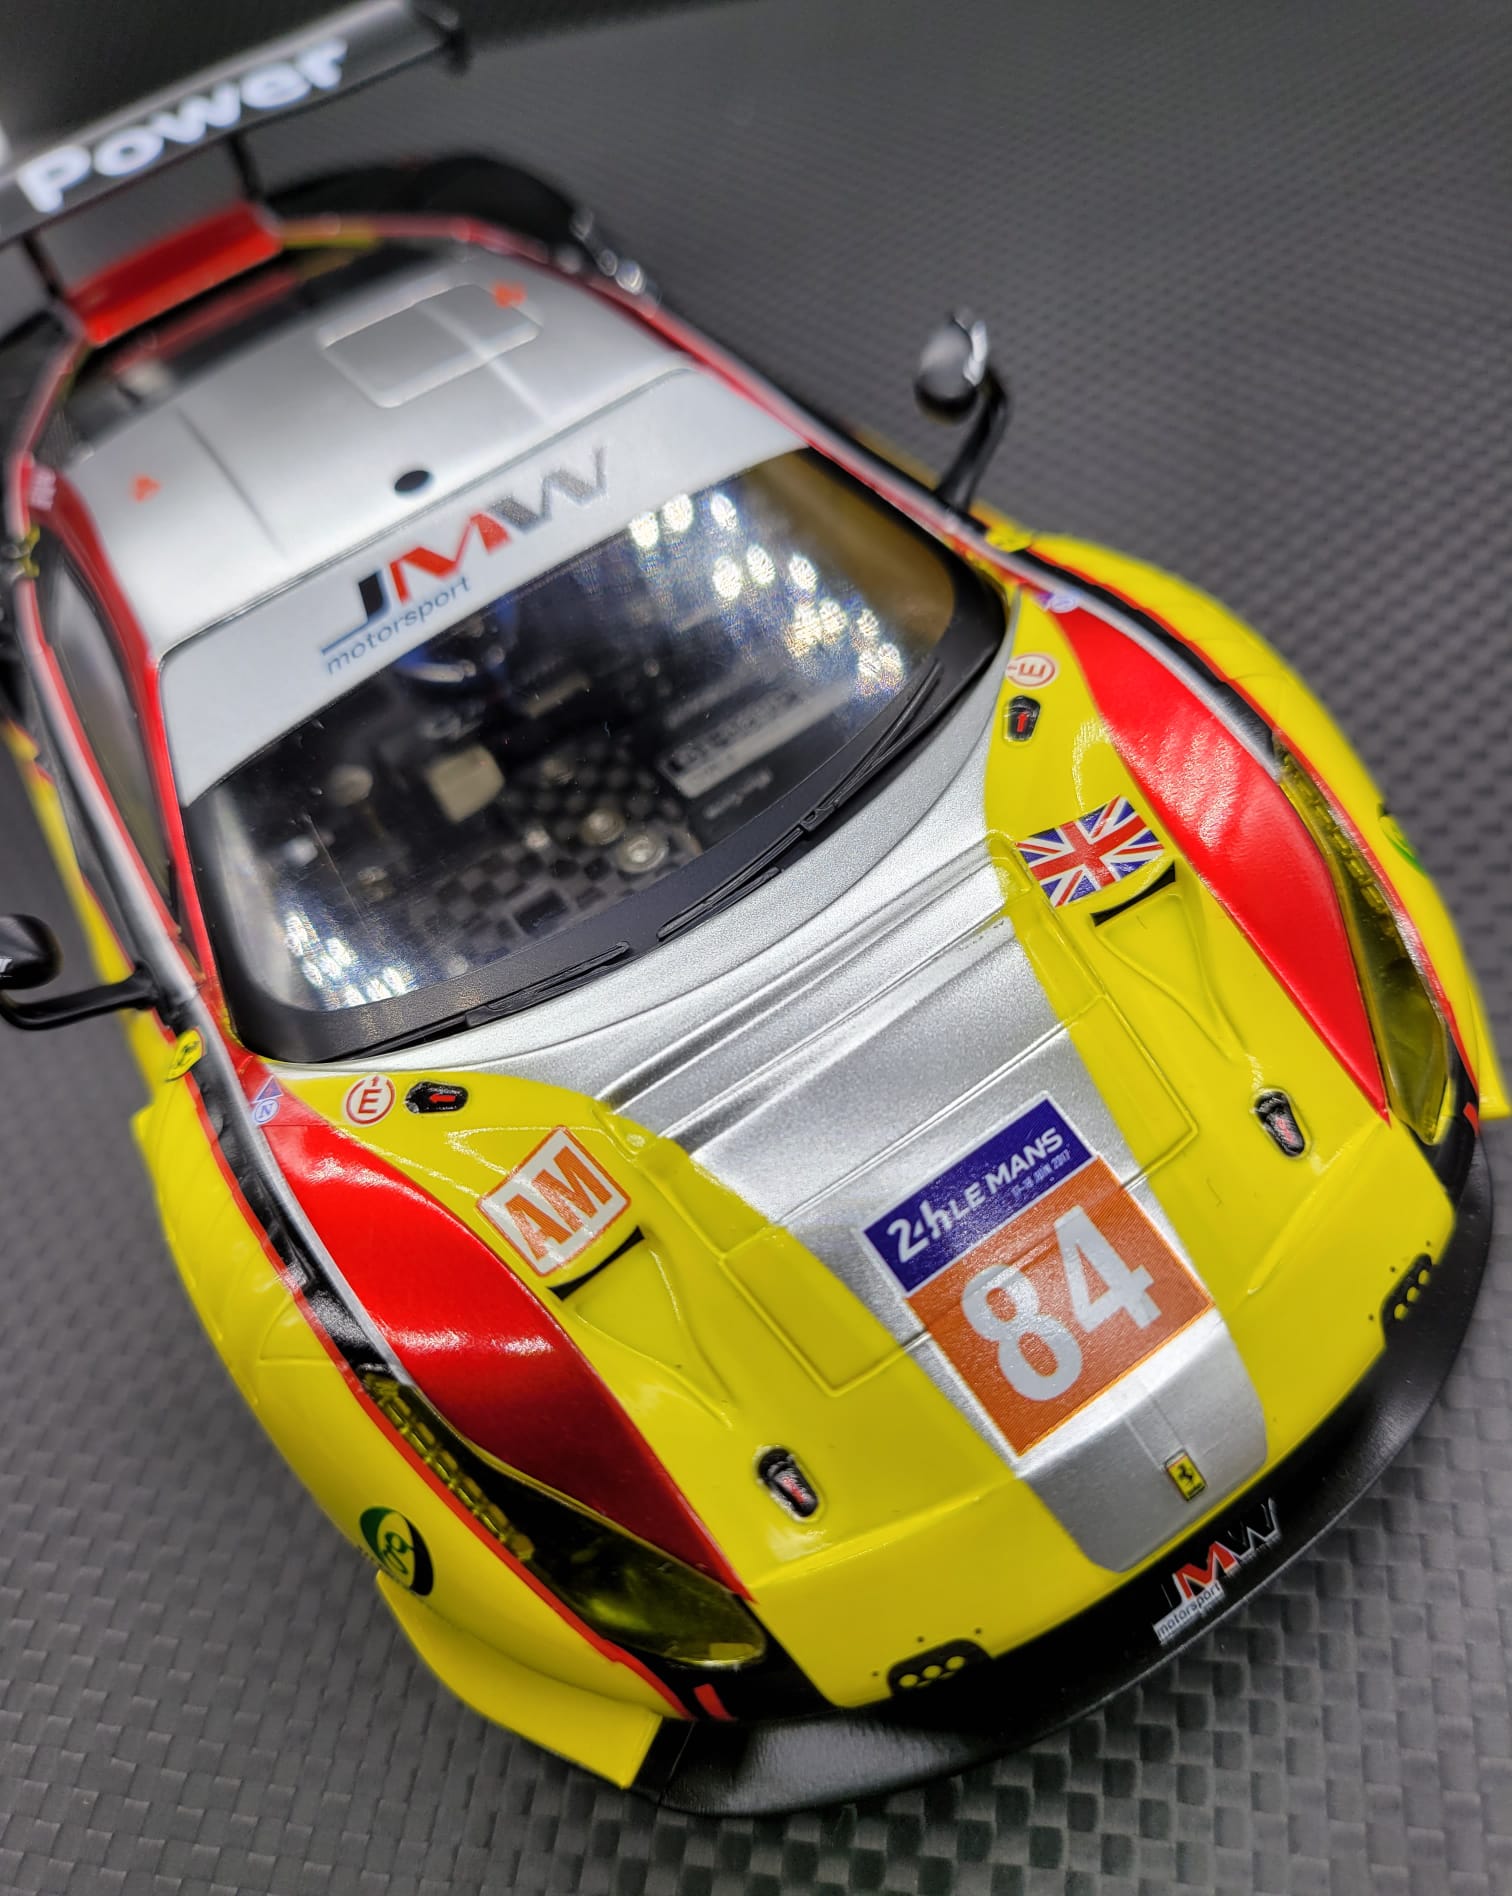 GL Ferrari 488 GT3 - Limited Edition No. 010 (Yellow-Red)